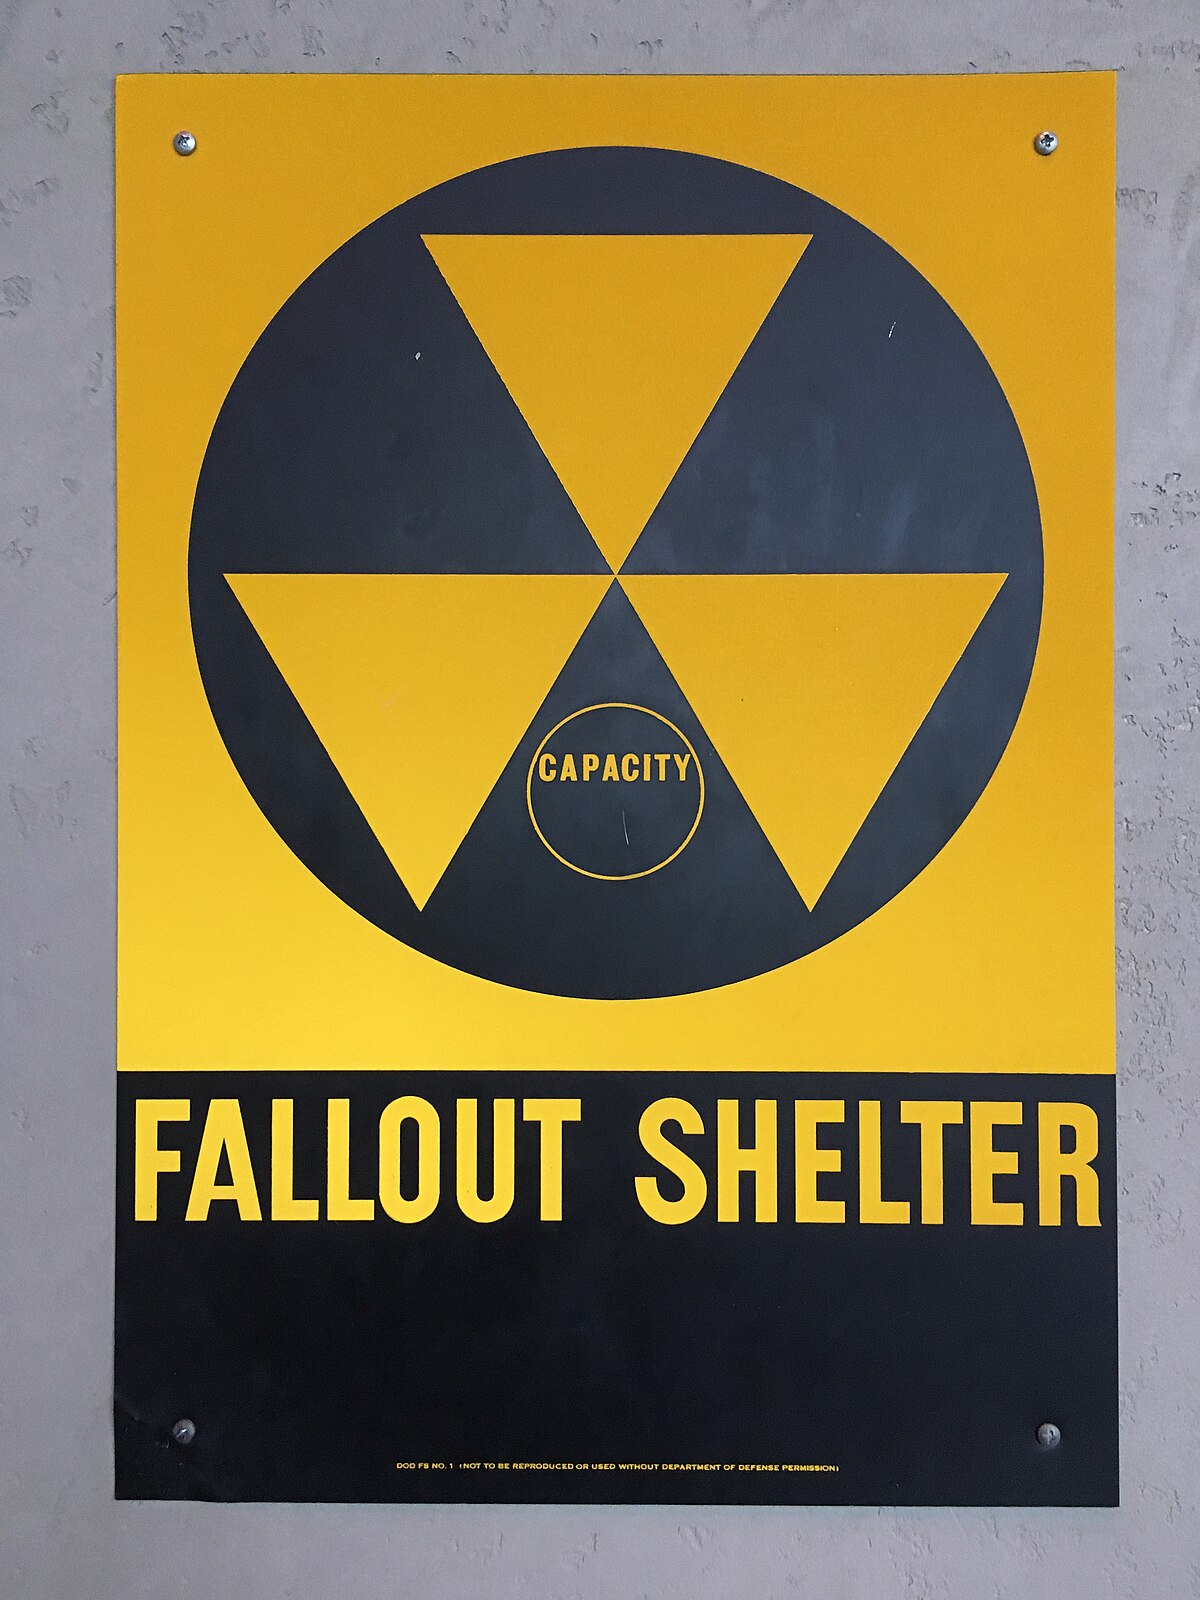 1200px-United_States_of_America_Fallout_shelter_sign.jpg